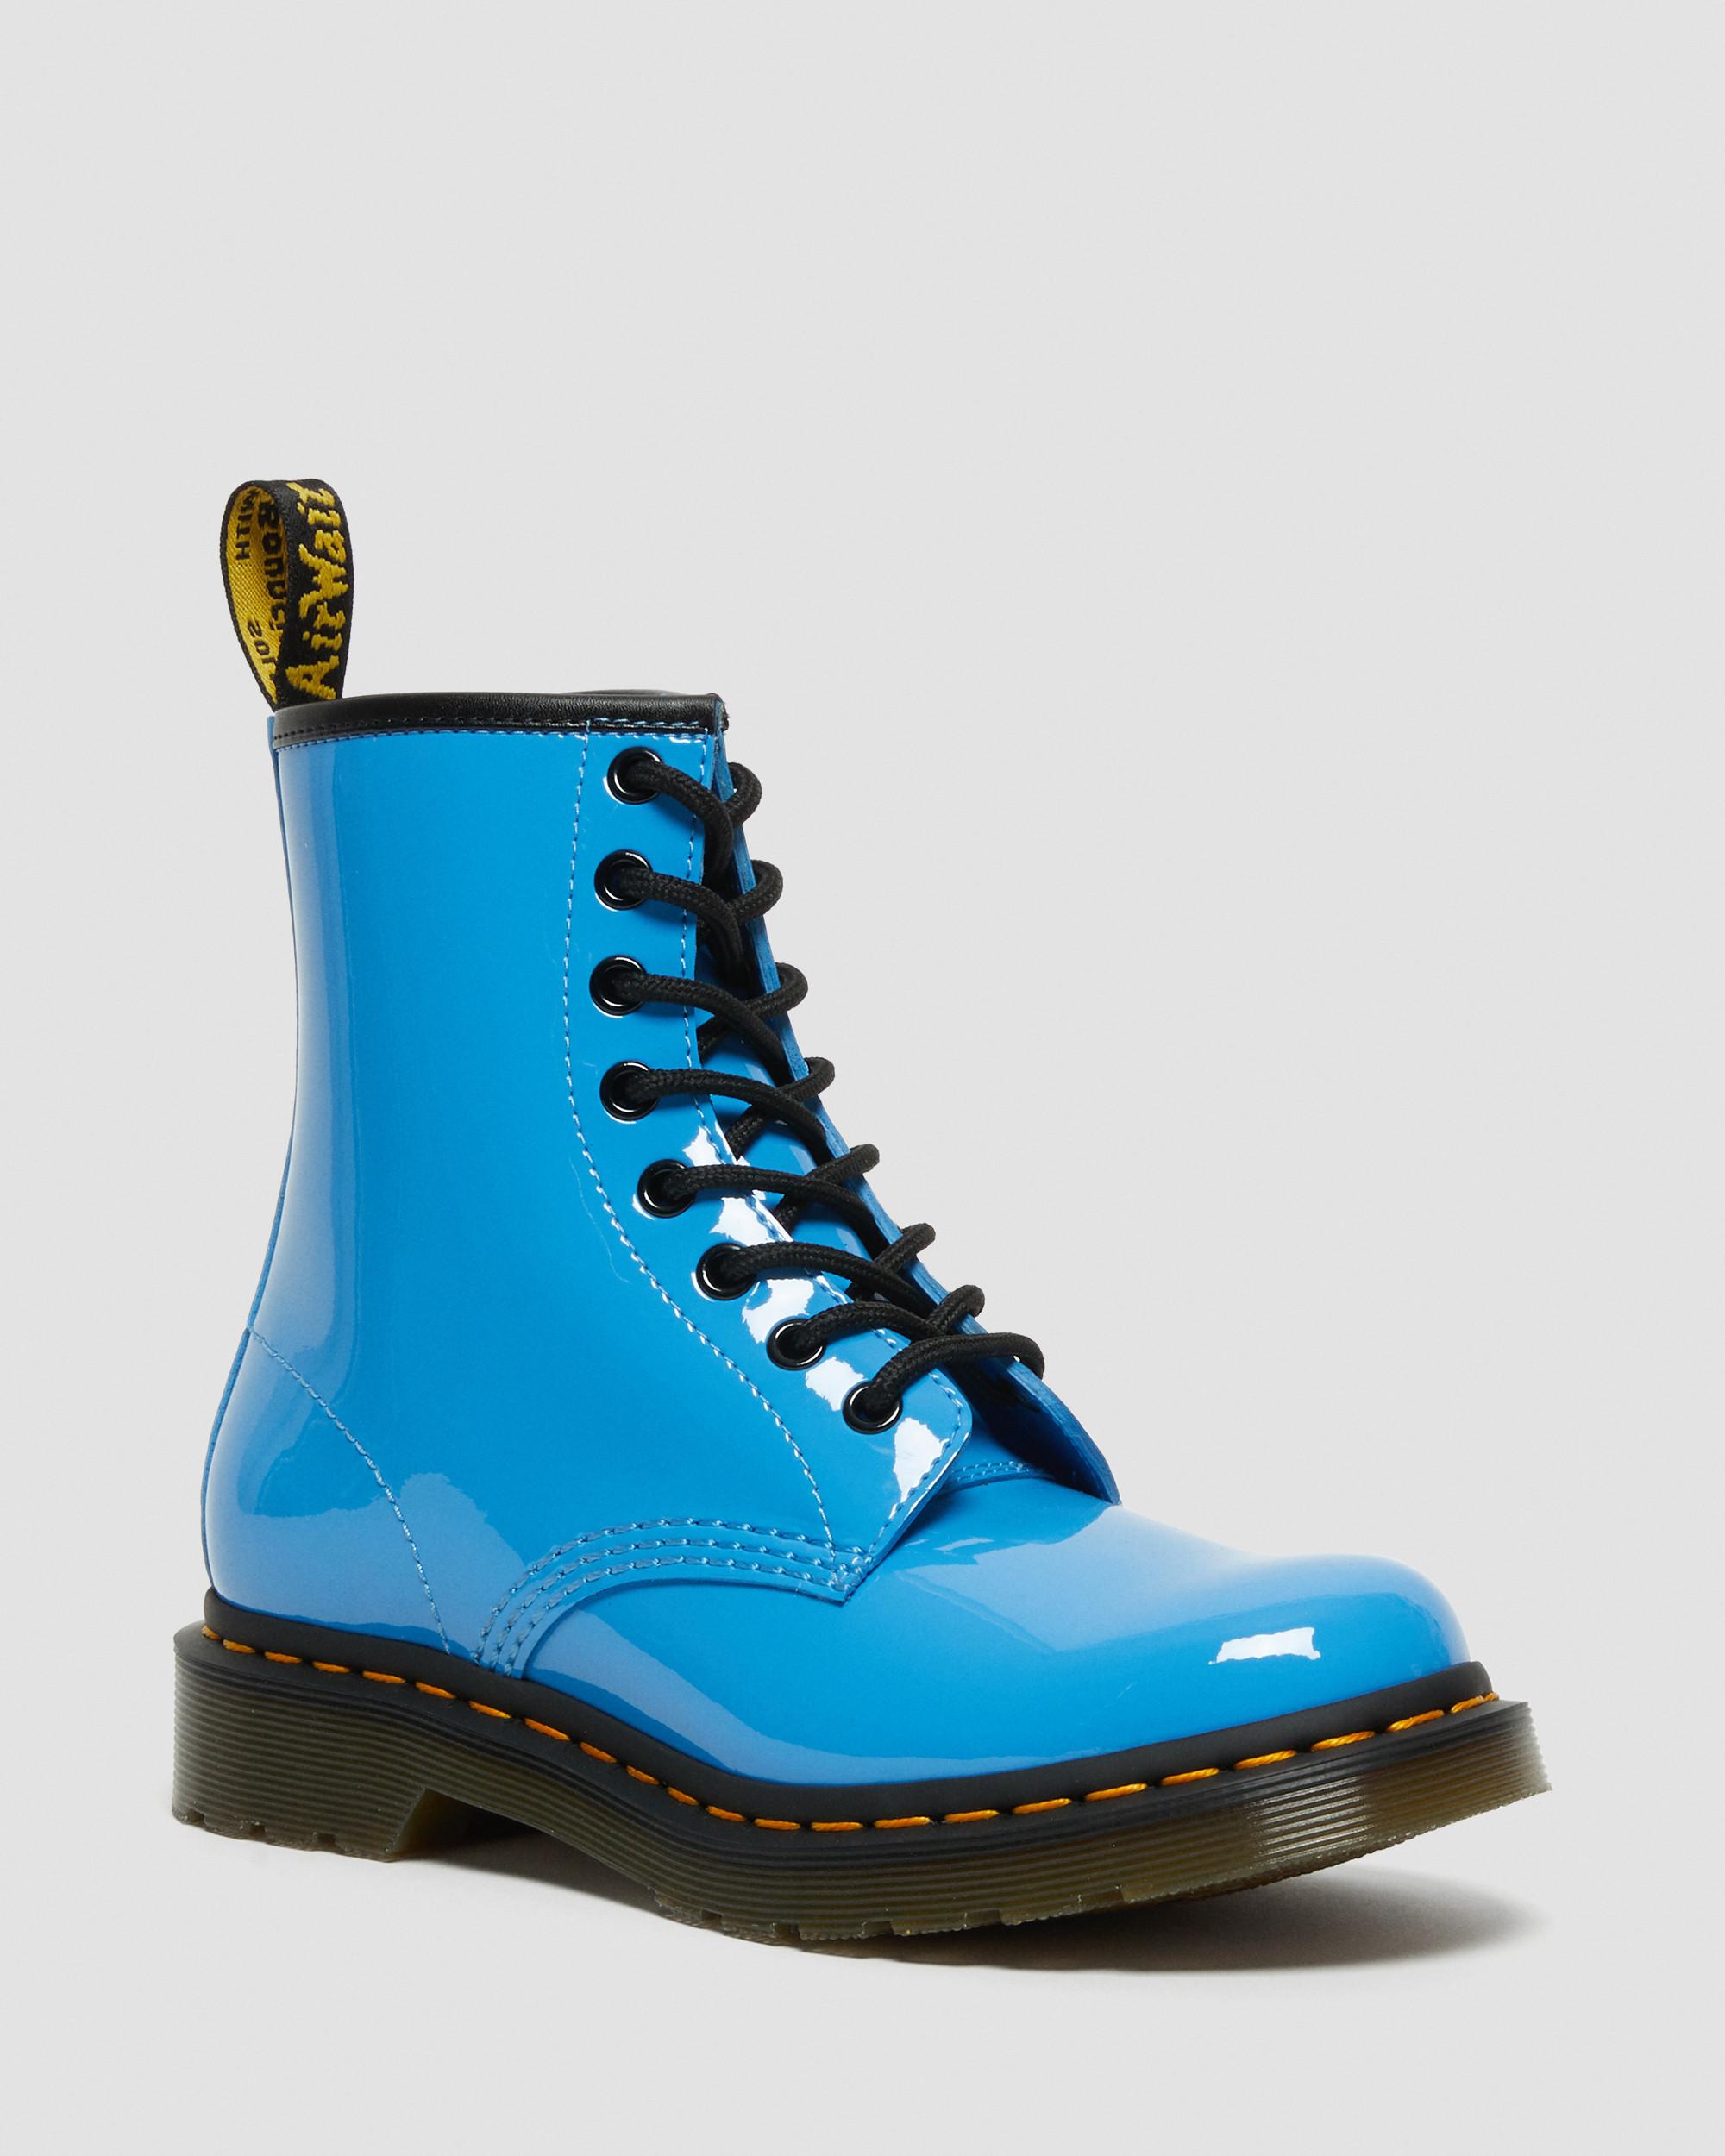 1460 Patent Leather Lace Up Boots in Blue | Dr. Martens